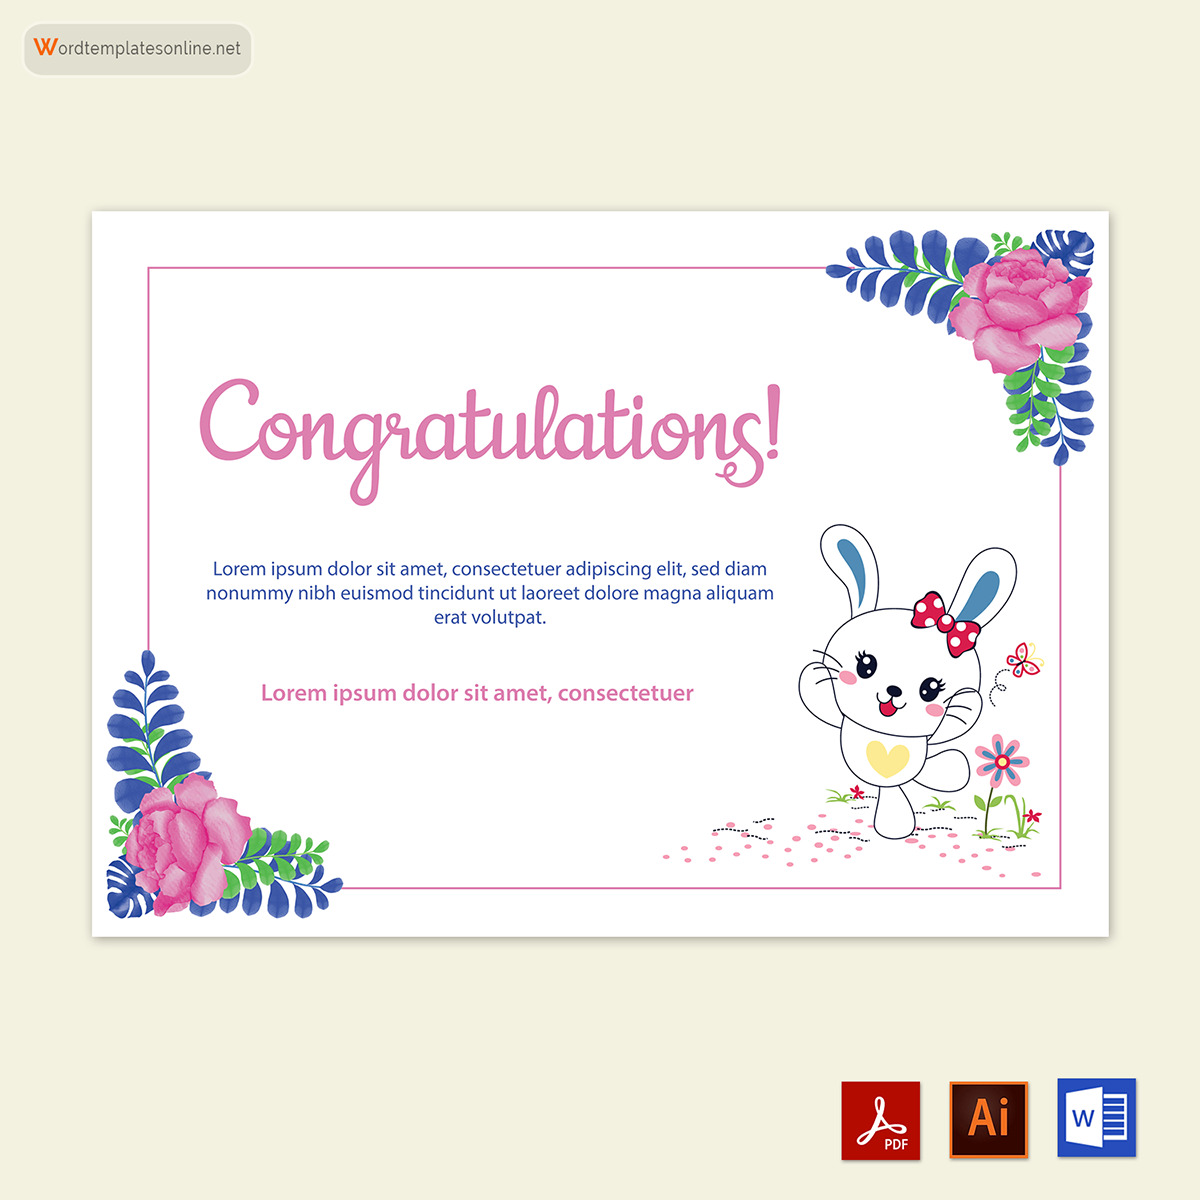 "Congratulations greeting card example in PDF format"